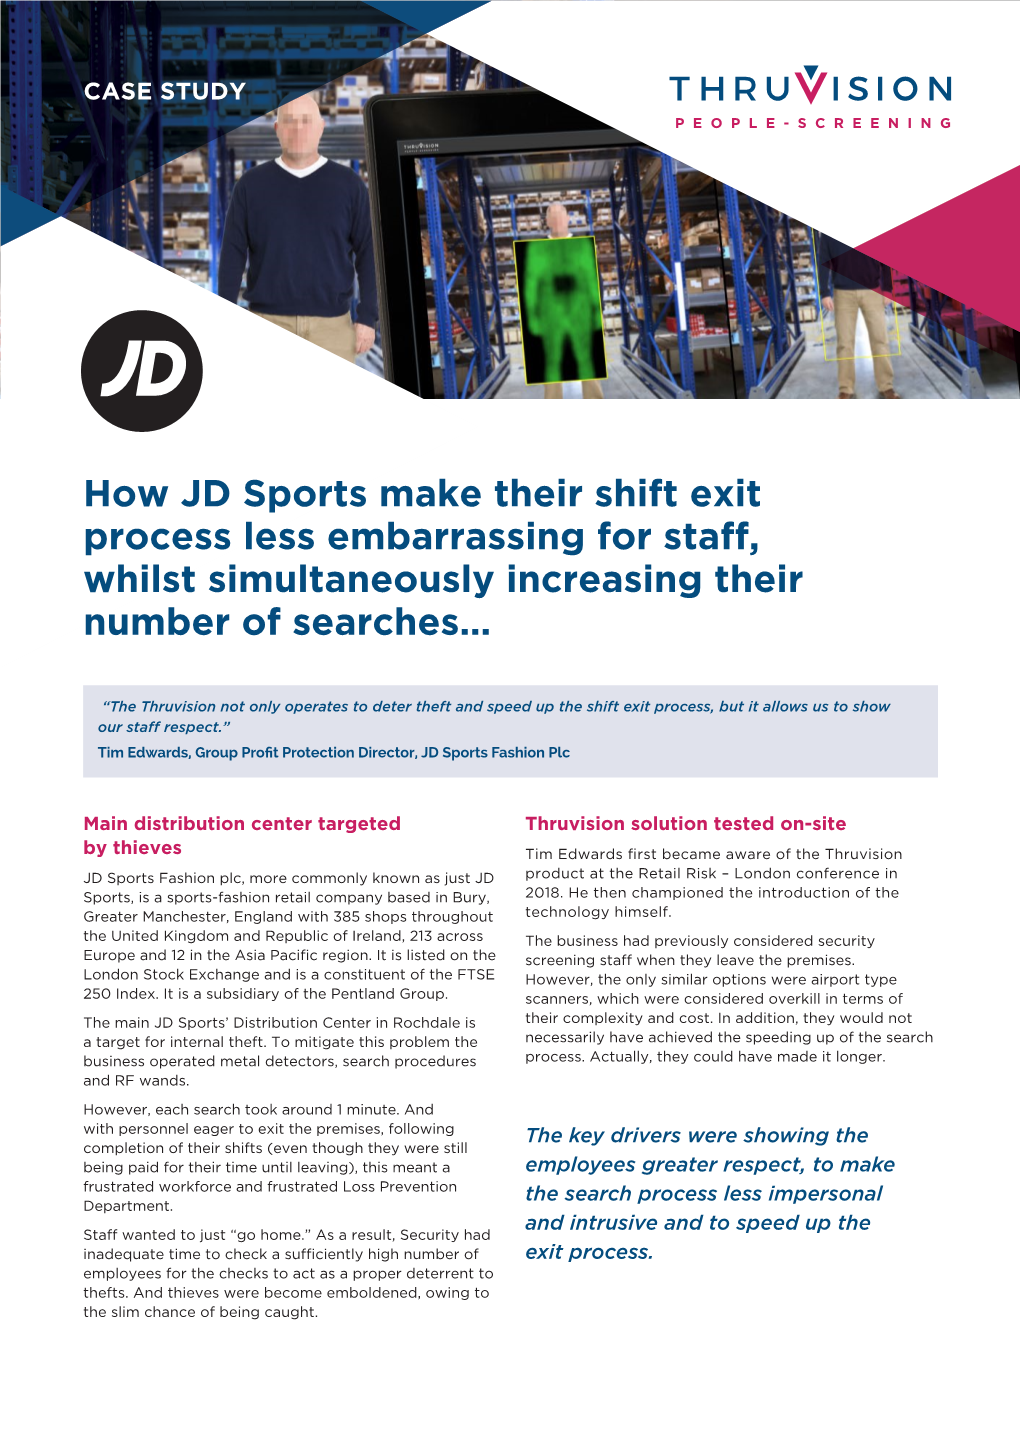 How JD Sports Make Their Shift Exit Process Less Embarrassing for Staff, Whilst Simultaneously Increasing Their Number of Searches…